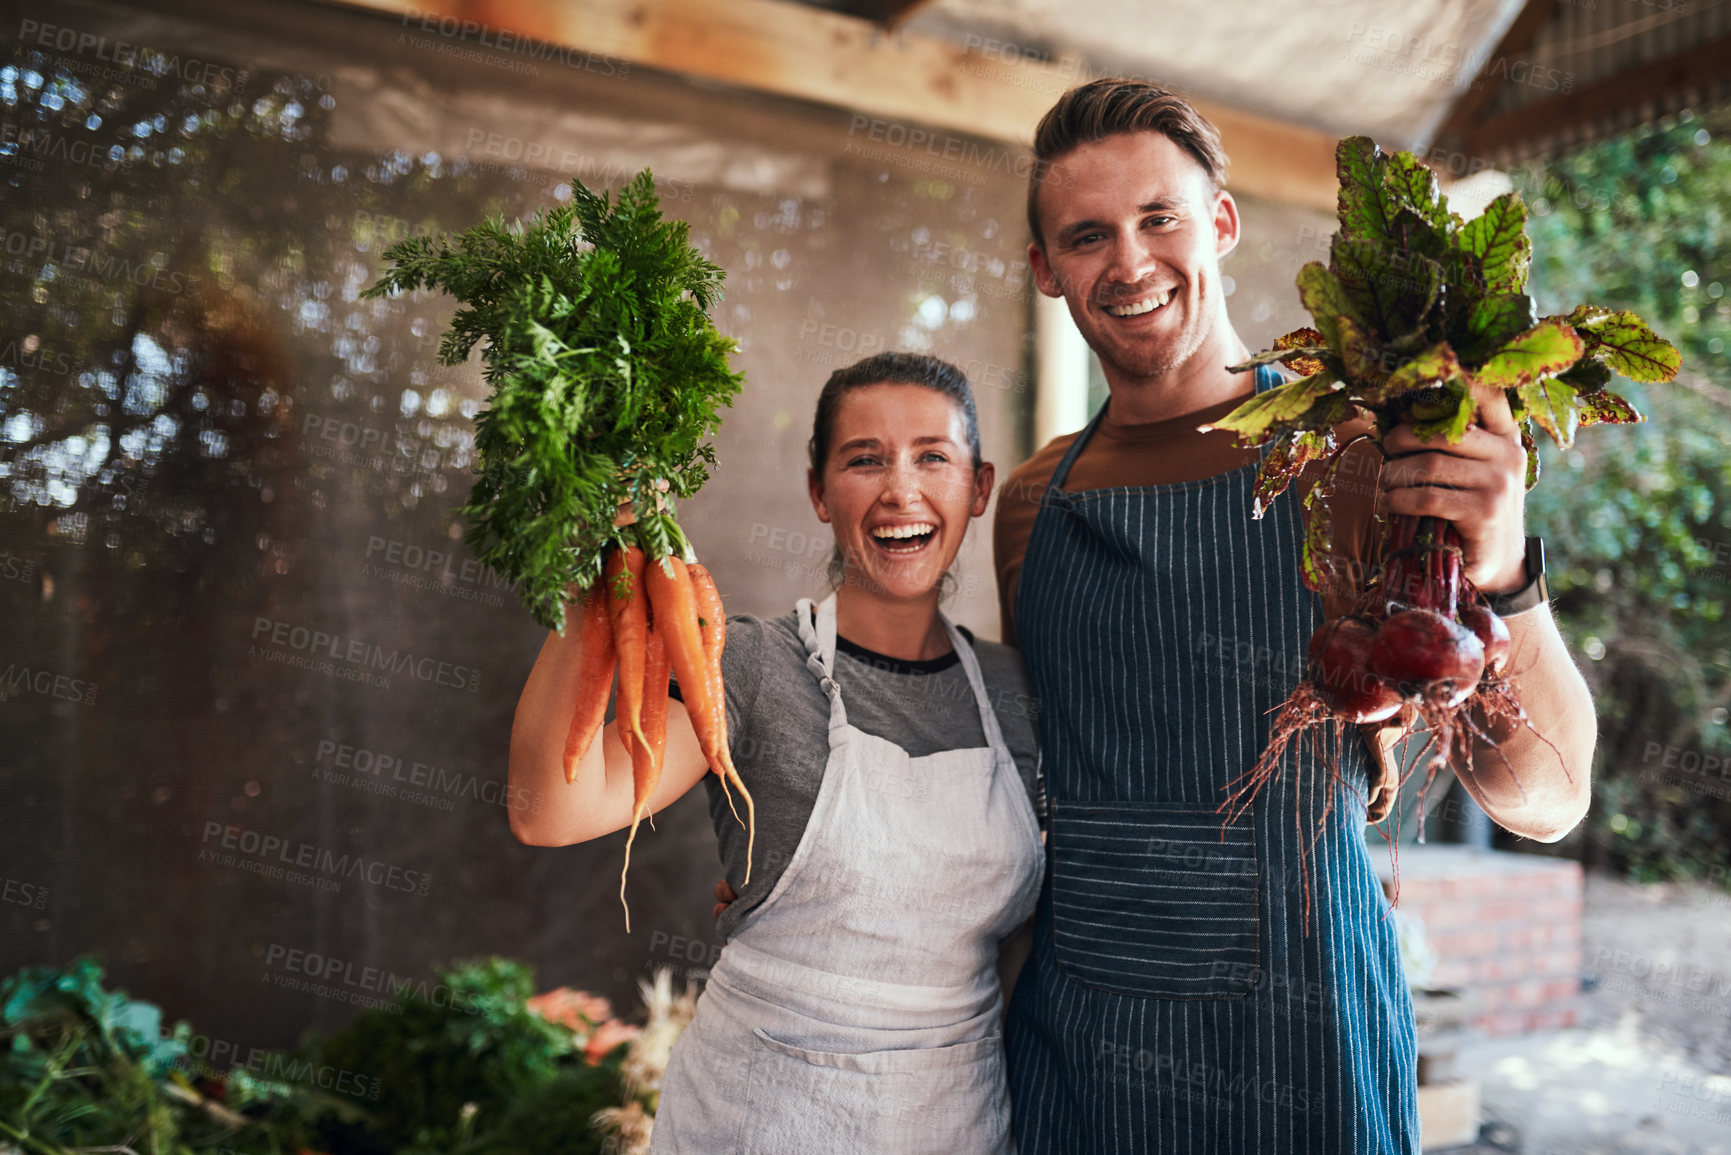 Buy stock photo Portrait of a happy young couple posing together holding bunches of freshly picked carrots and beetroot at their farm